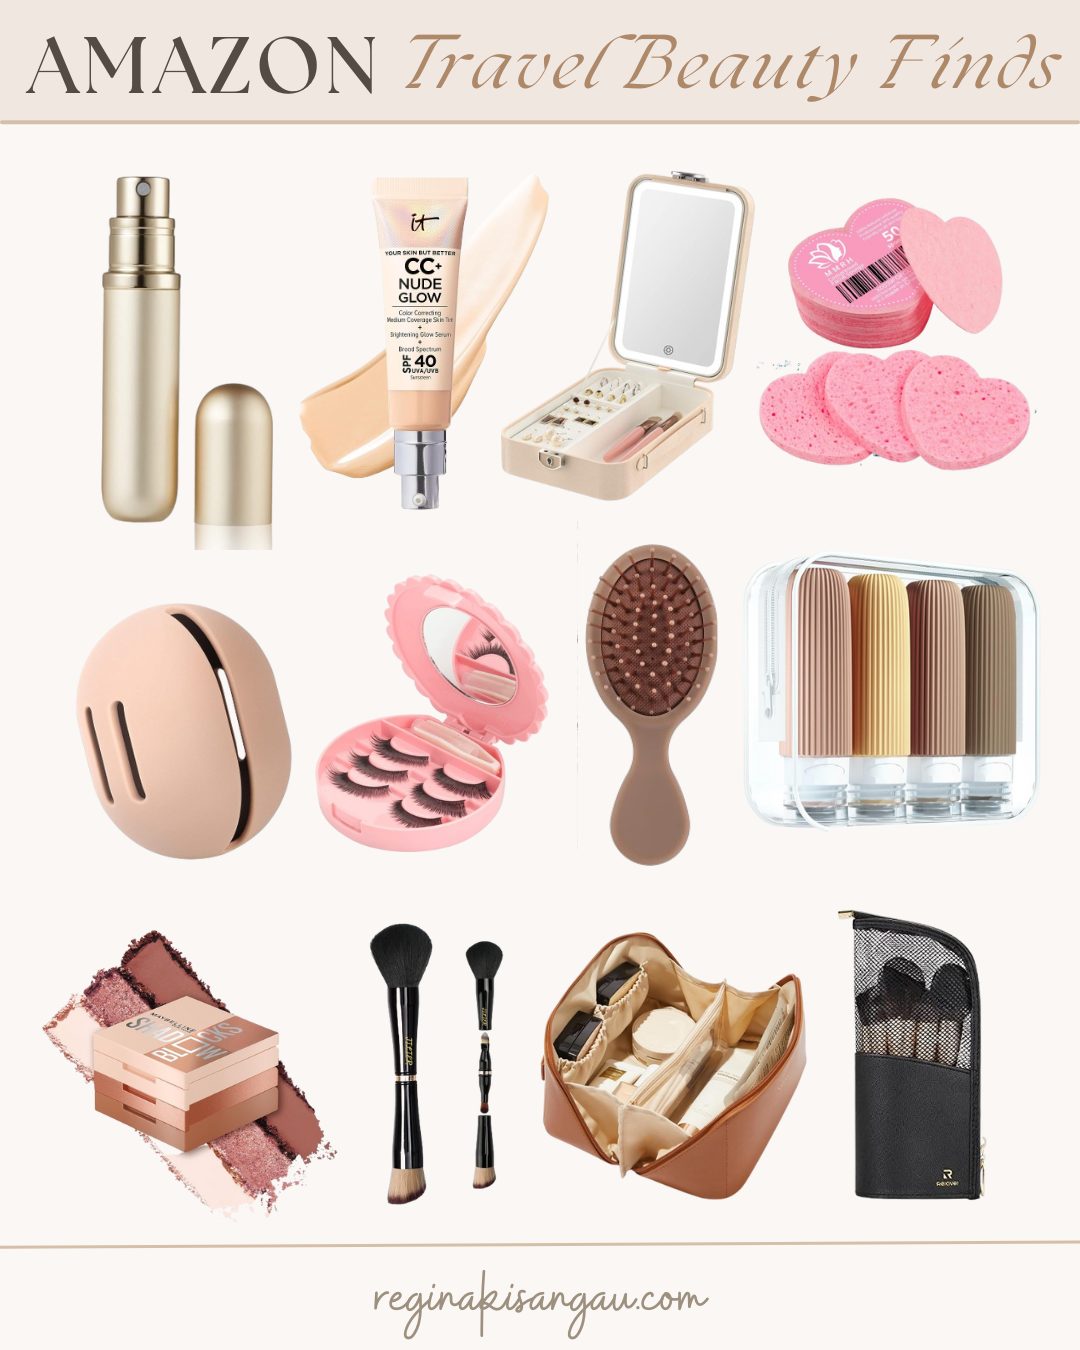 Amazon Travel Beauty Finds for On-the-Go Glamor